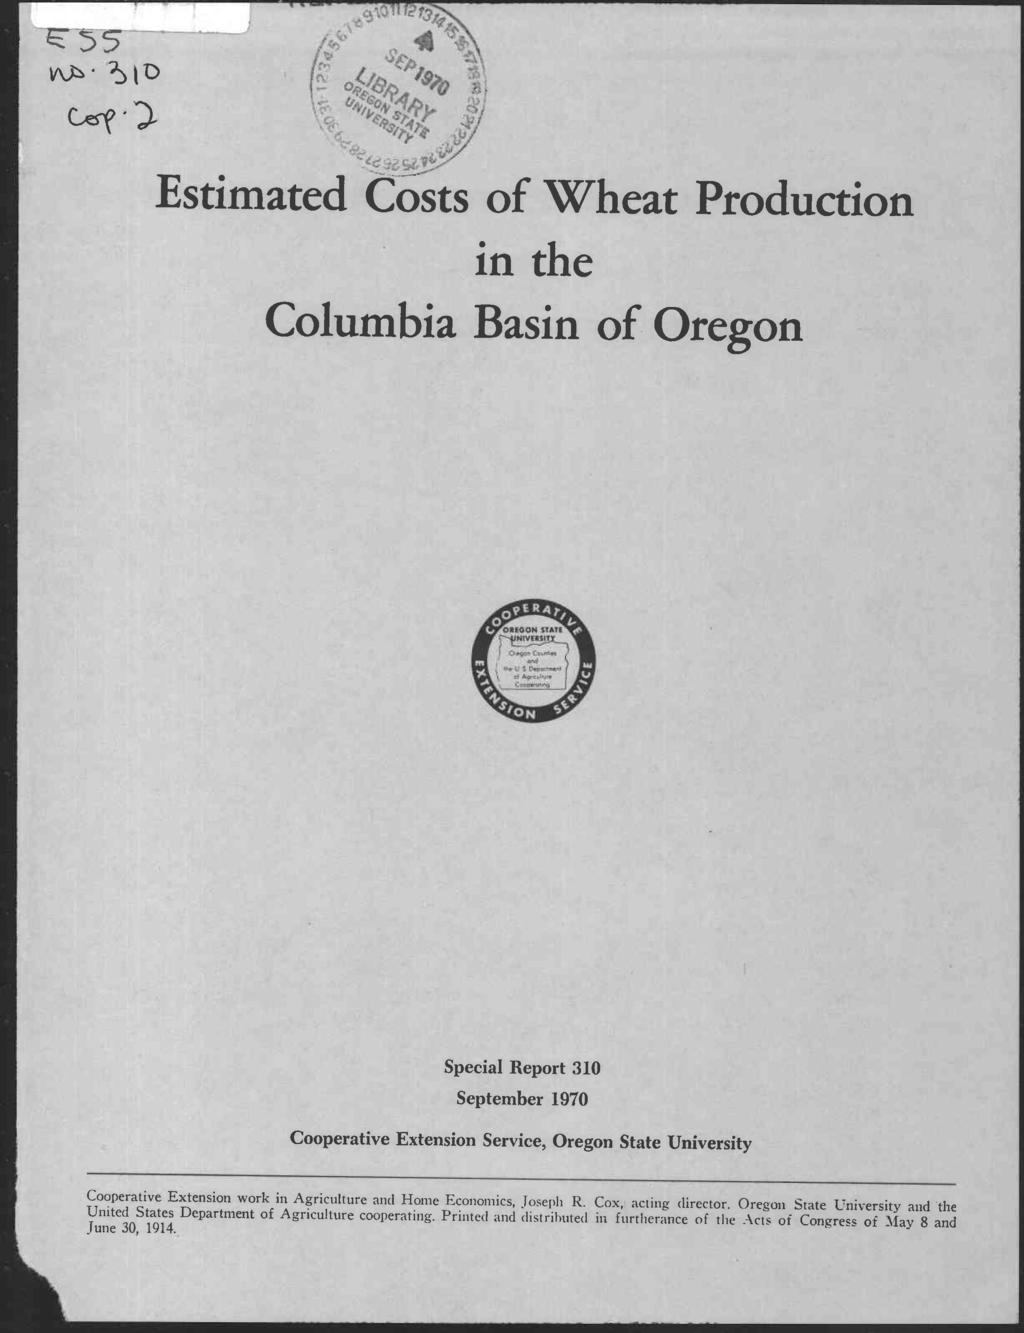 5,3 19 4 ks'epi Vv 11) 449, stob s Cerf tfibt 1ft -41 50). bu Estimated Costs of Wheat Production in the Columbia Basin of Oregon oa EGON SIMI C od of.q en pac.